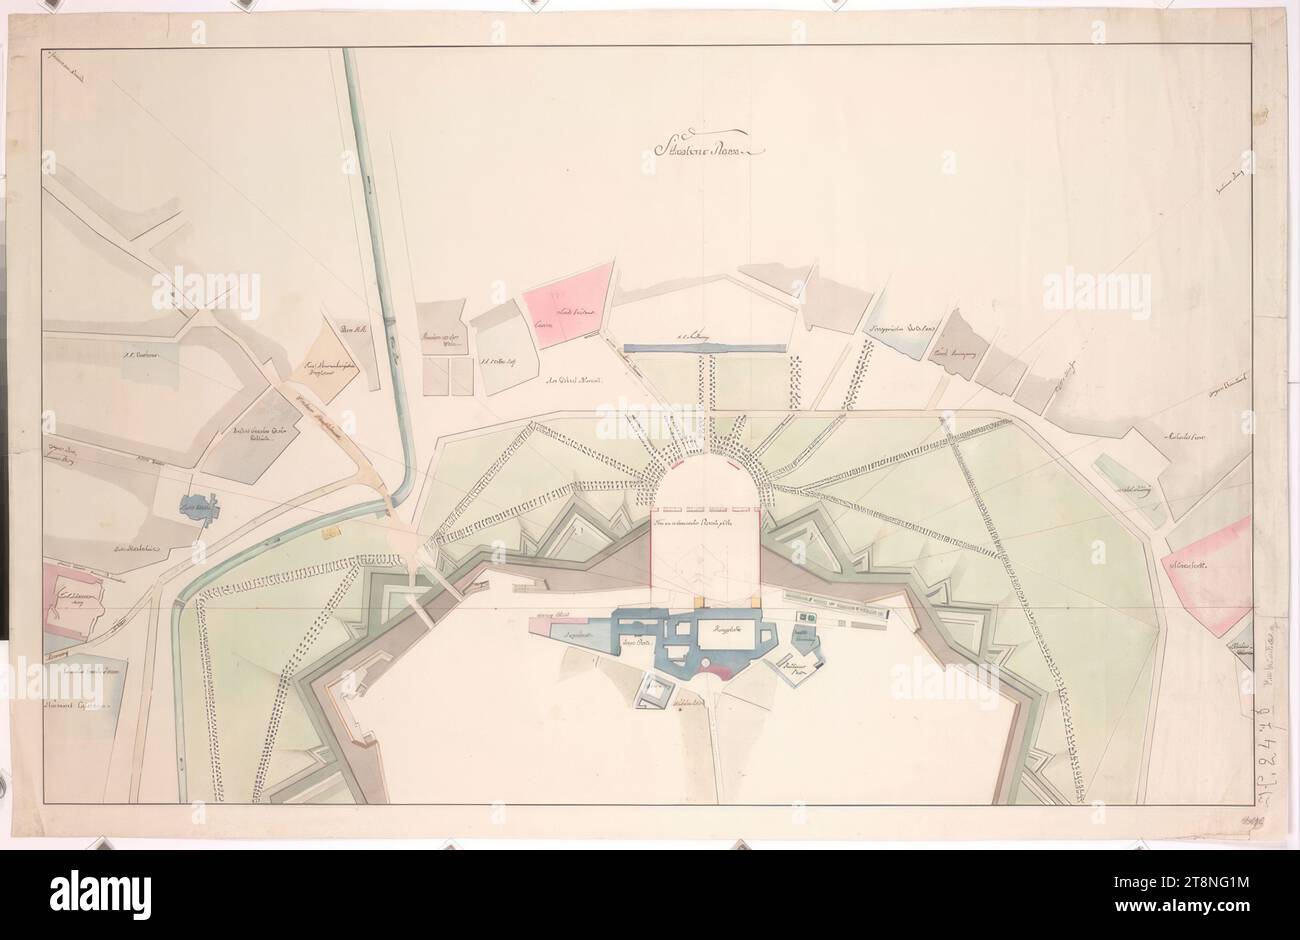 Vienna I, Hofburg, conversion and new building project, site plan, 1802-1804, plan, graphite (preliminary drawing), pen and black; gray yellow, pink, green and blue wash, sheet: 62.6 x 96.5 cm, 'Situations Plann'; location details Stock Photo